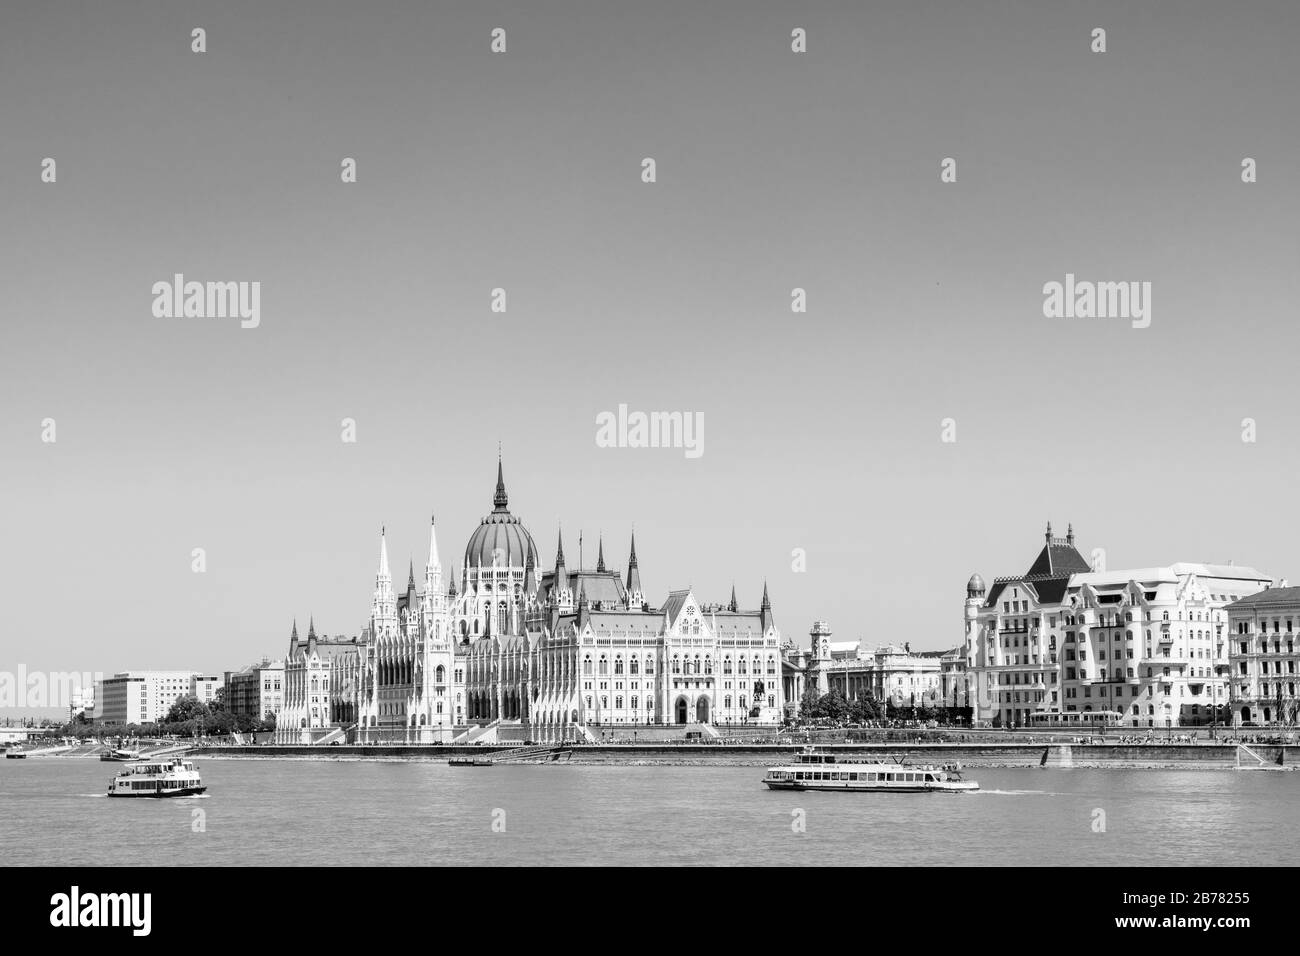 Pest Parlament Black and White image Budapest Stock Photo